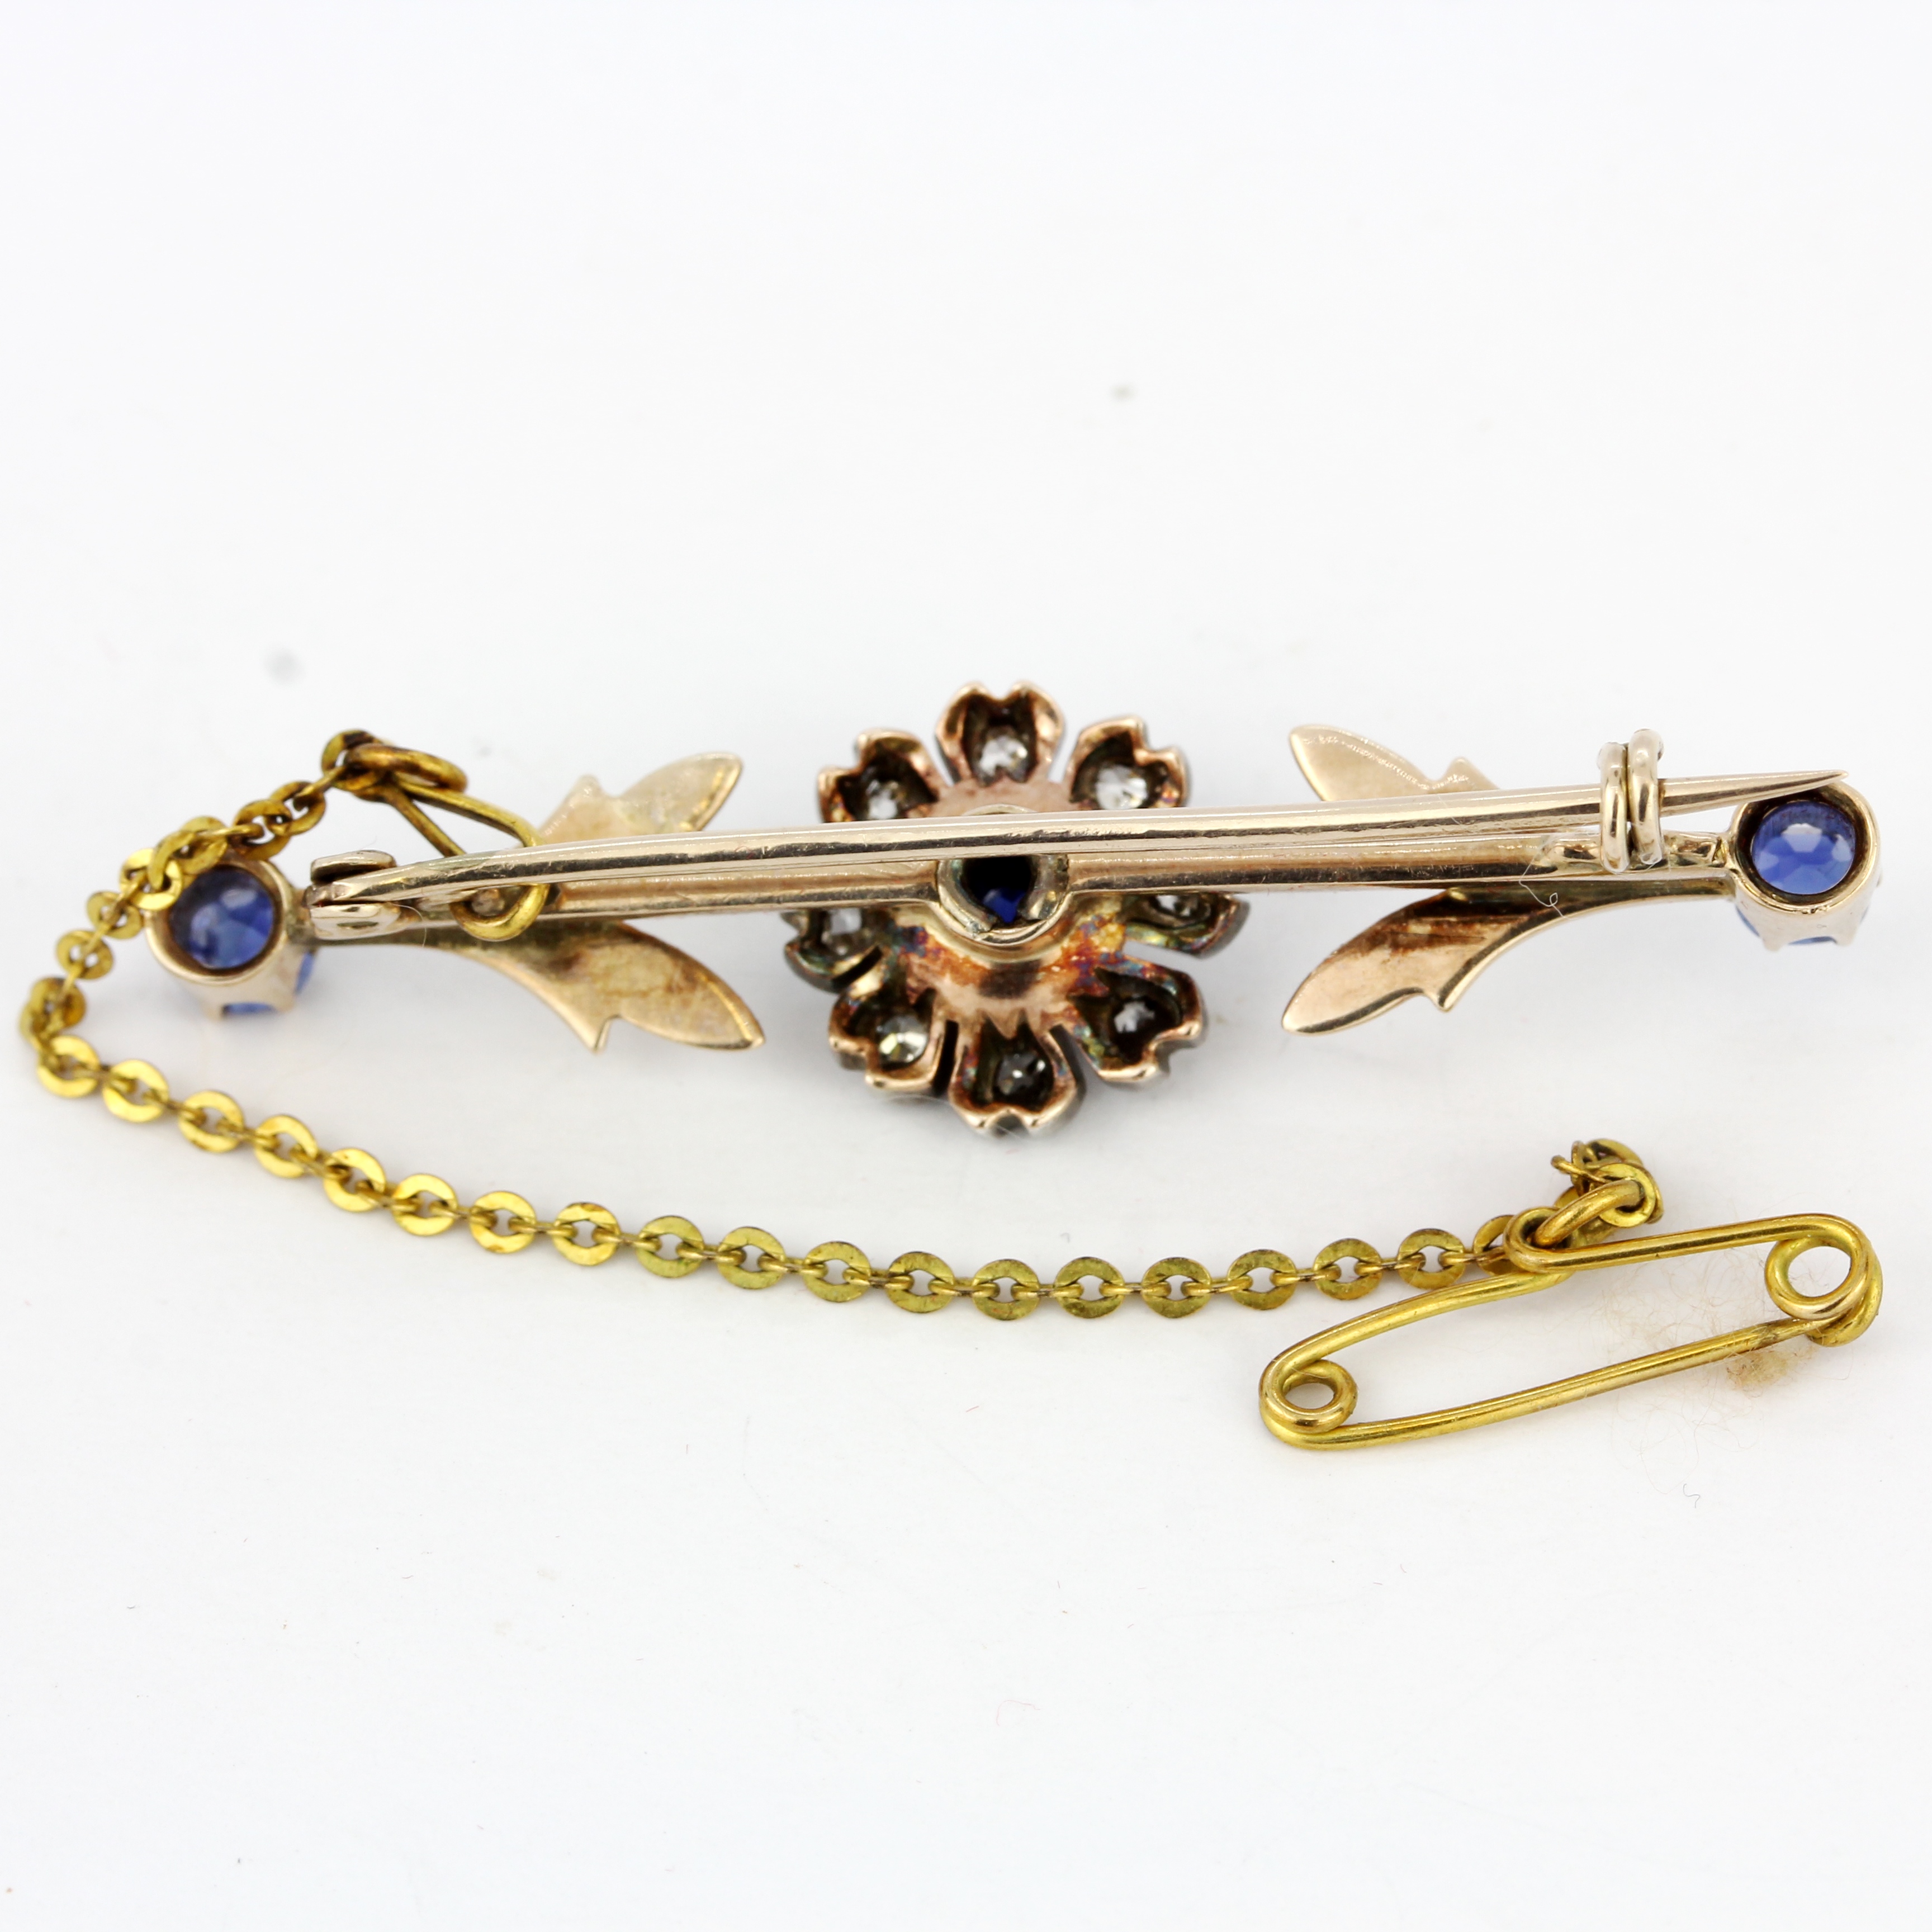 A rose metal (tested minimum 9ct gold) brooch set with sapphires and diamonds, L. 4.5cm. - Image 3 of 4